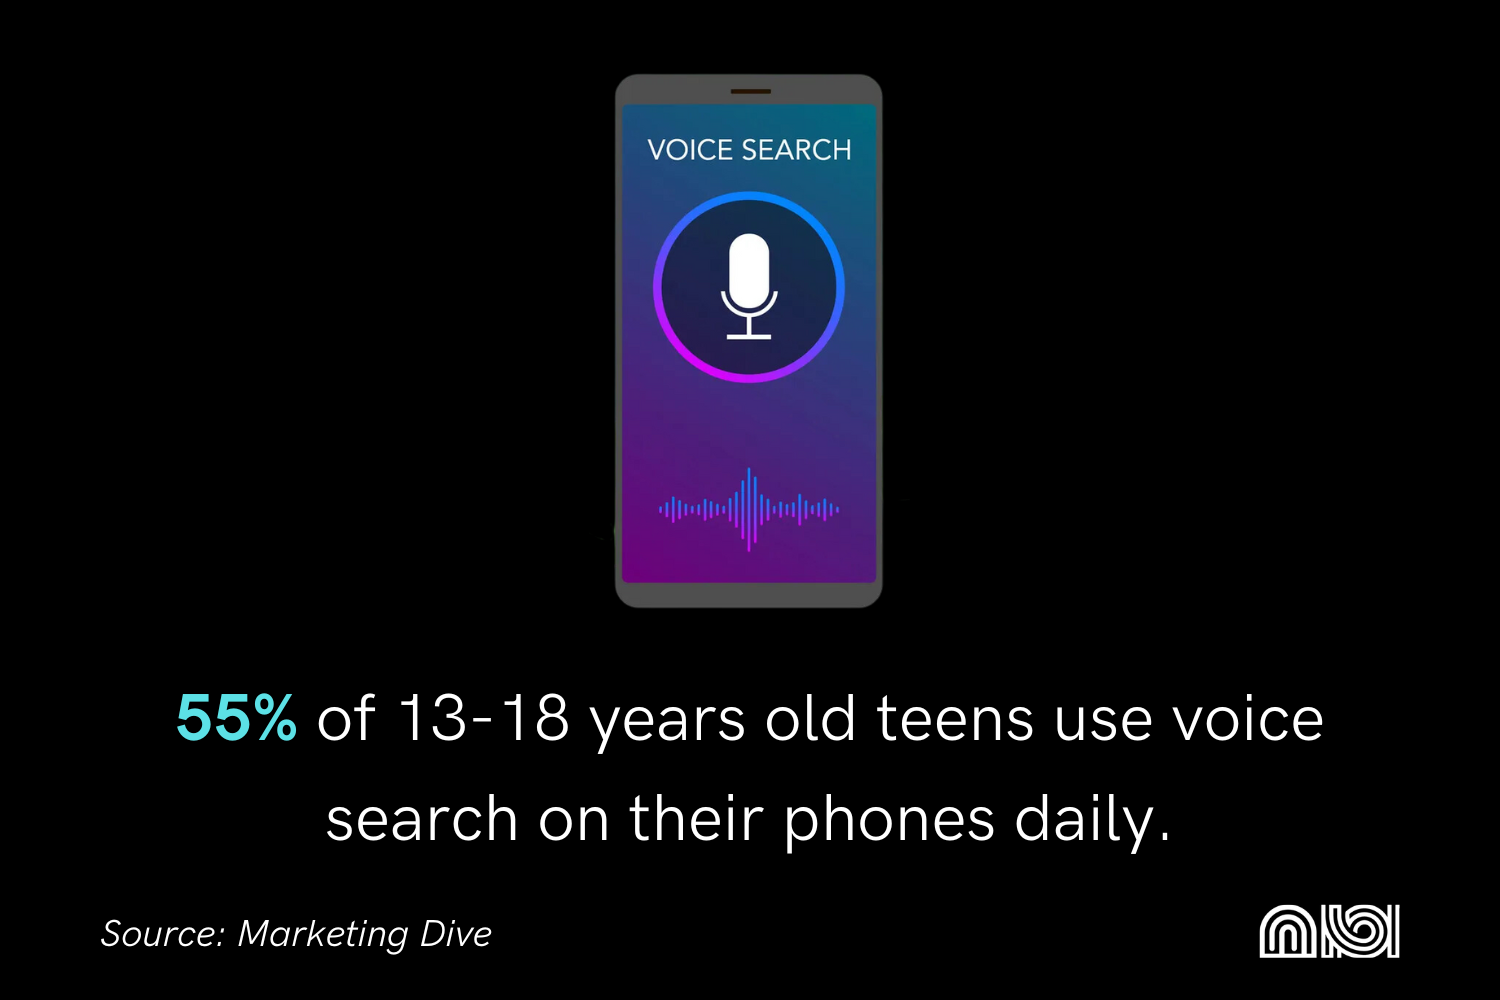 Statistic: 55% of teens aged 13-18 use daily voice search on mobile phones.